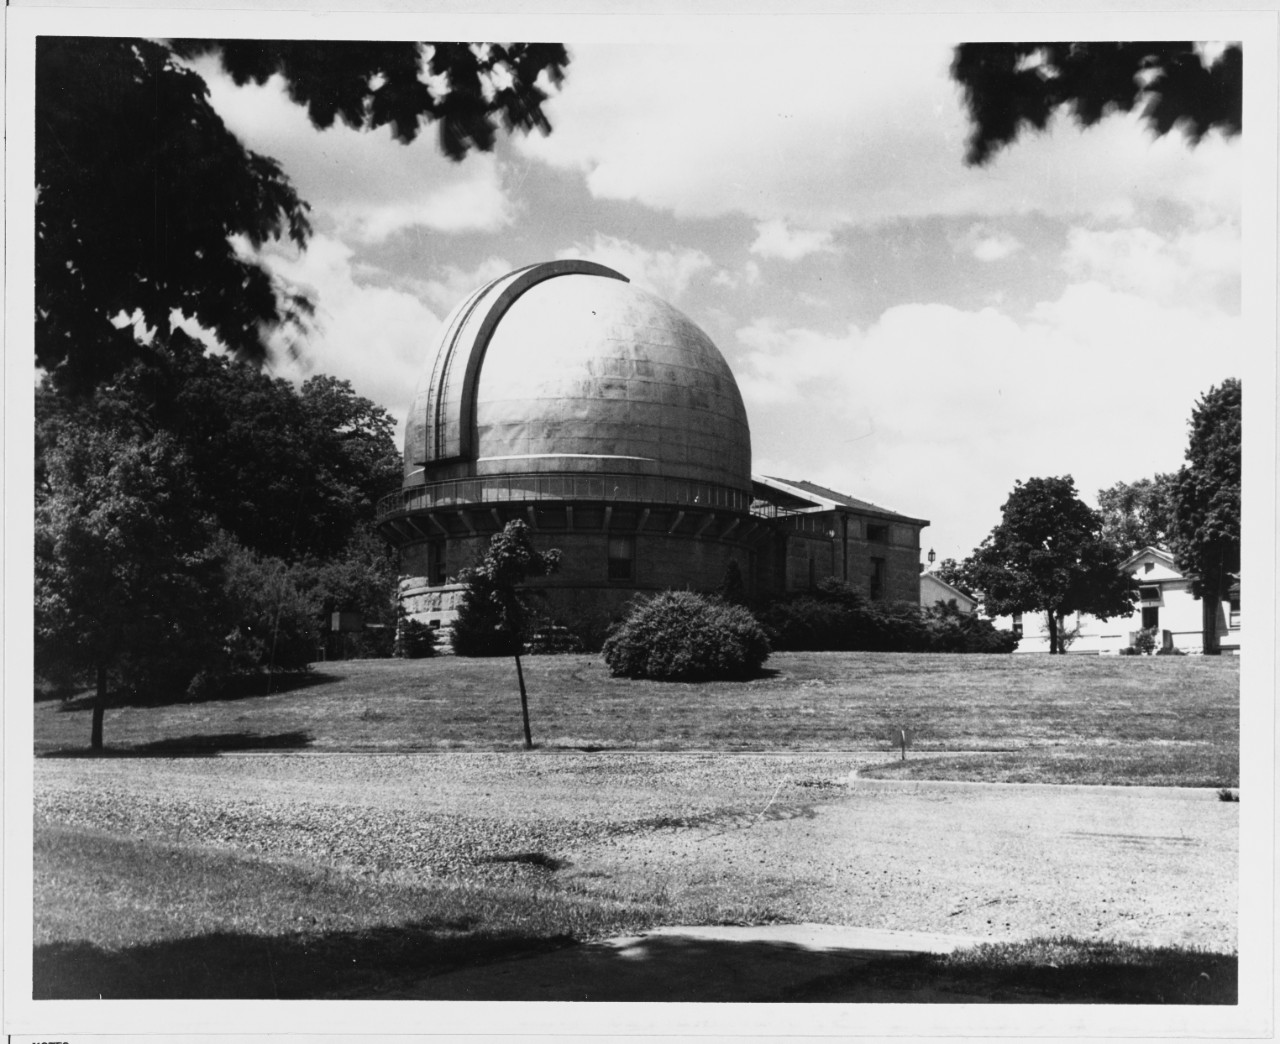 Asaph Hall, Naval Observatory. 26" Dome, housing the 26-inch Refractor